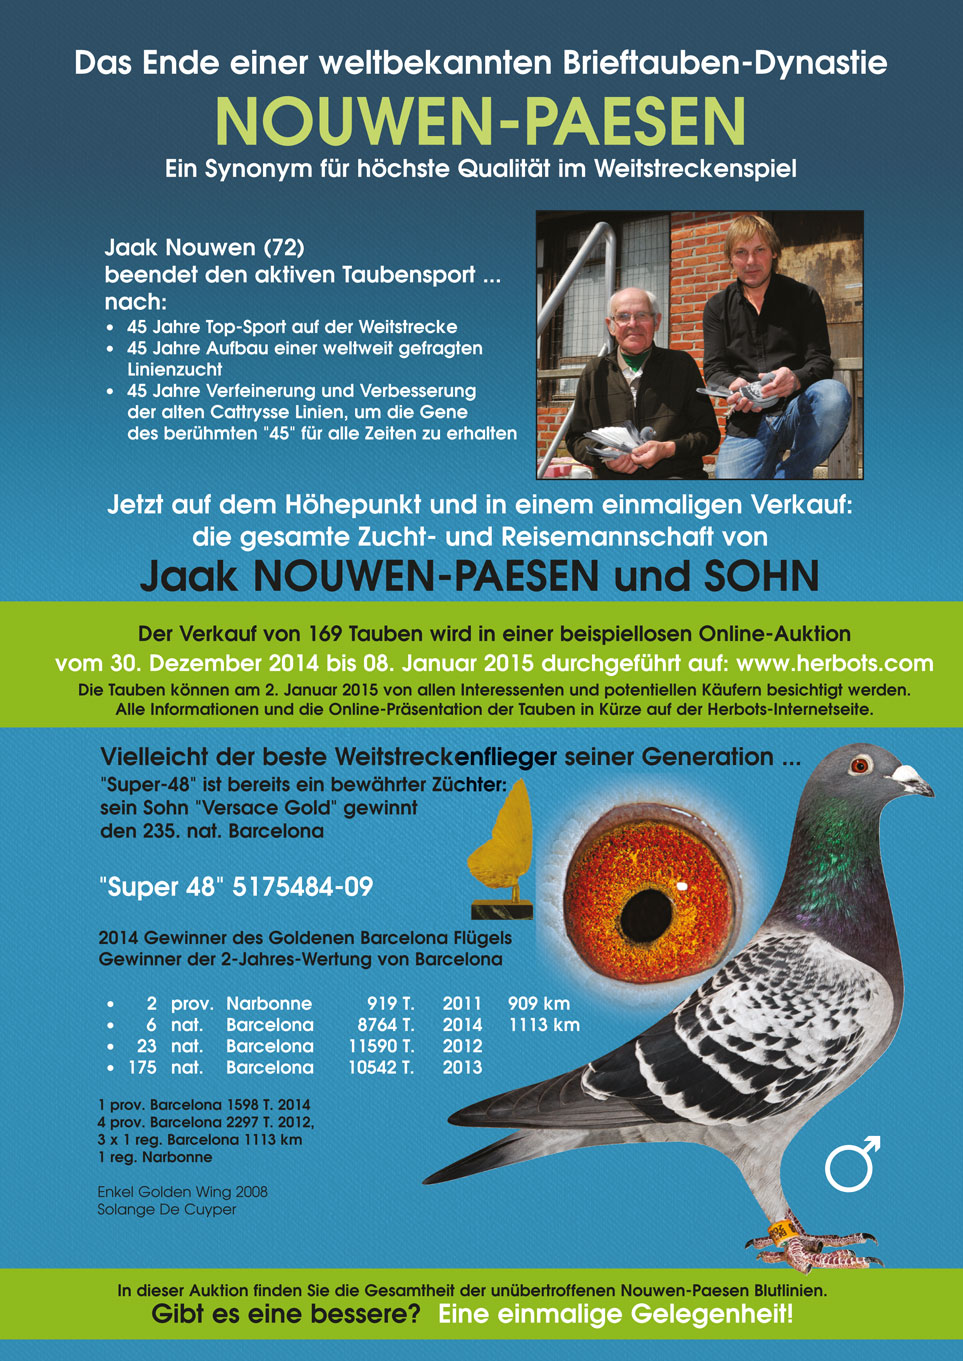 NOUWEN-PAESEN - the end of a famous dynasty of pigeons